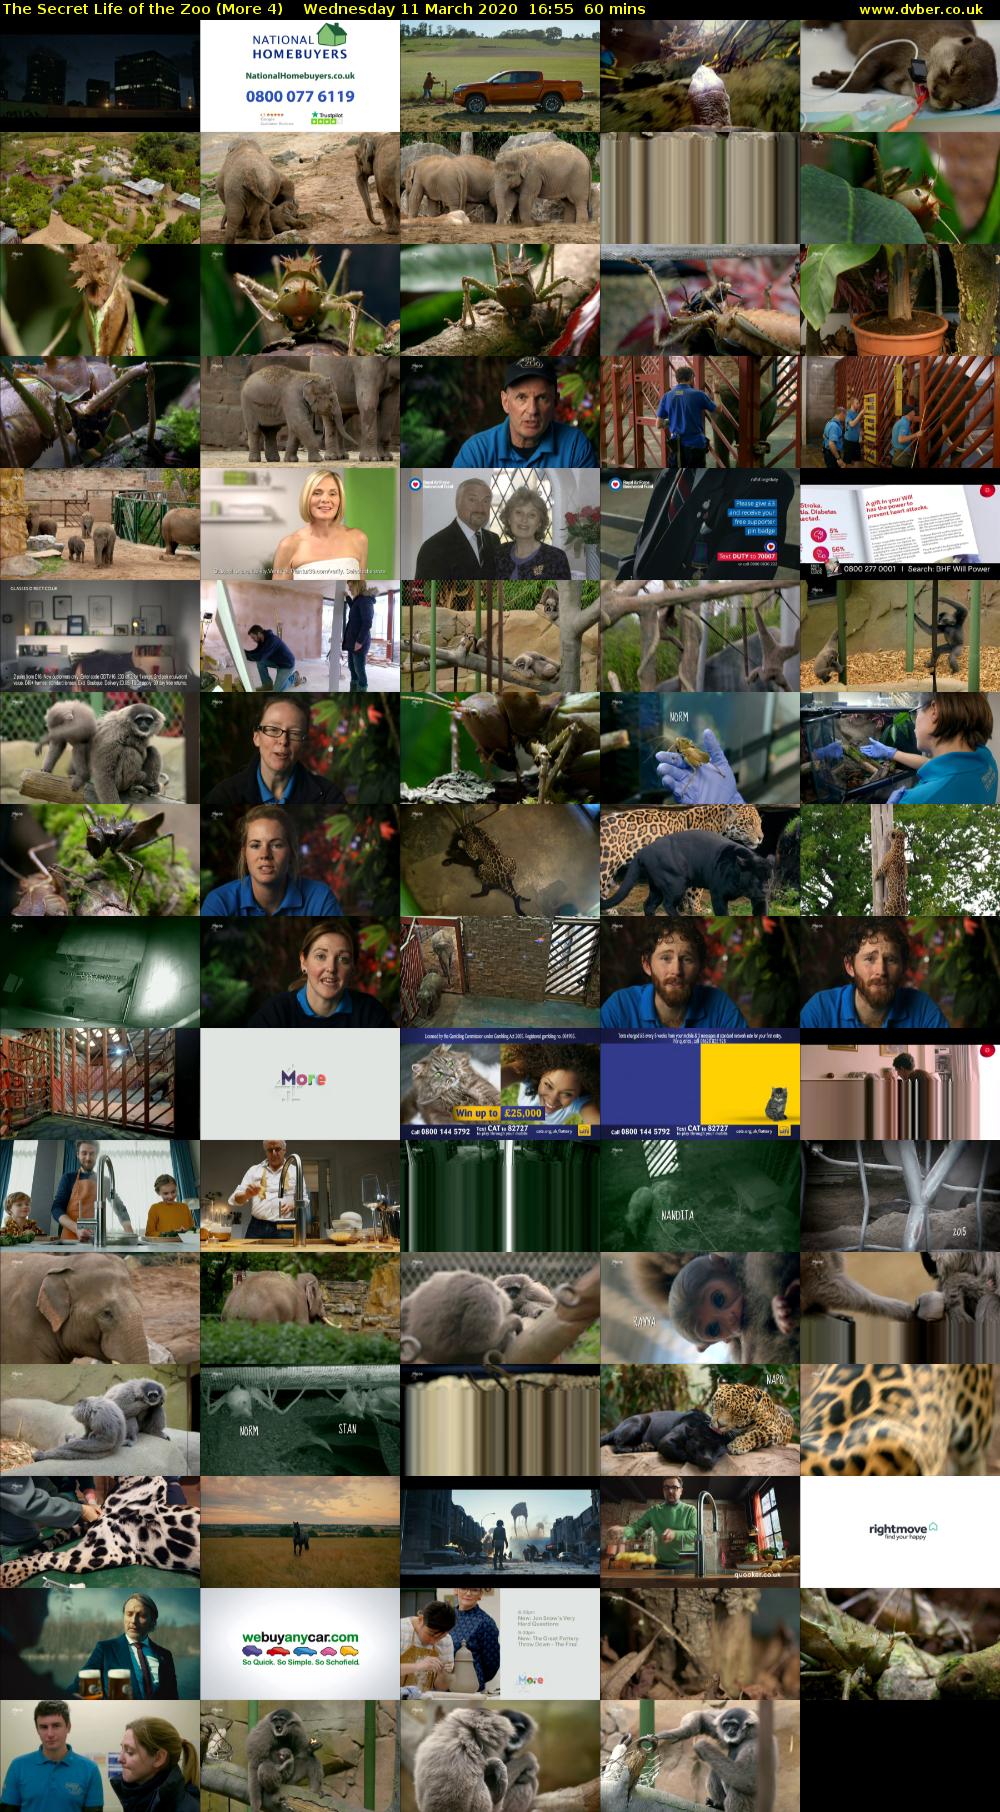 The Secret Life of the Zoo (More 4) Wednesday 11 March 2020 16:55 - 17:55